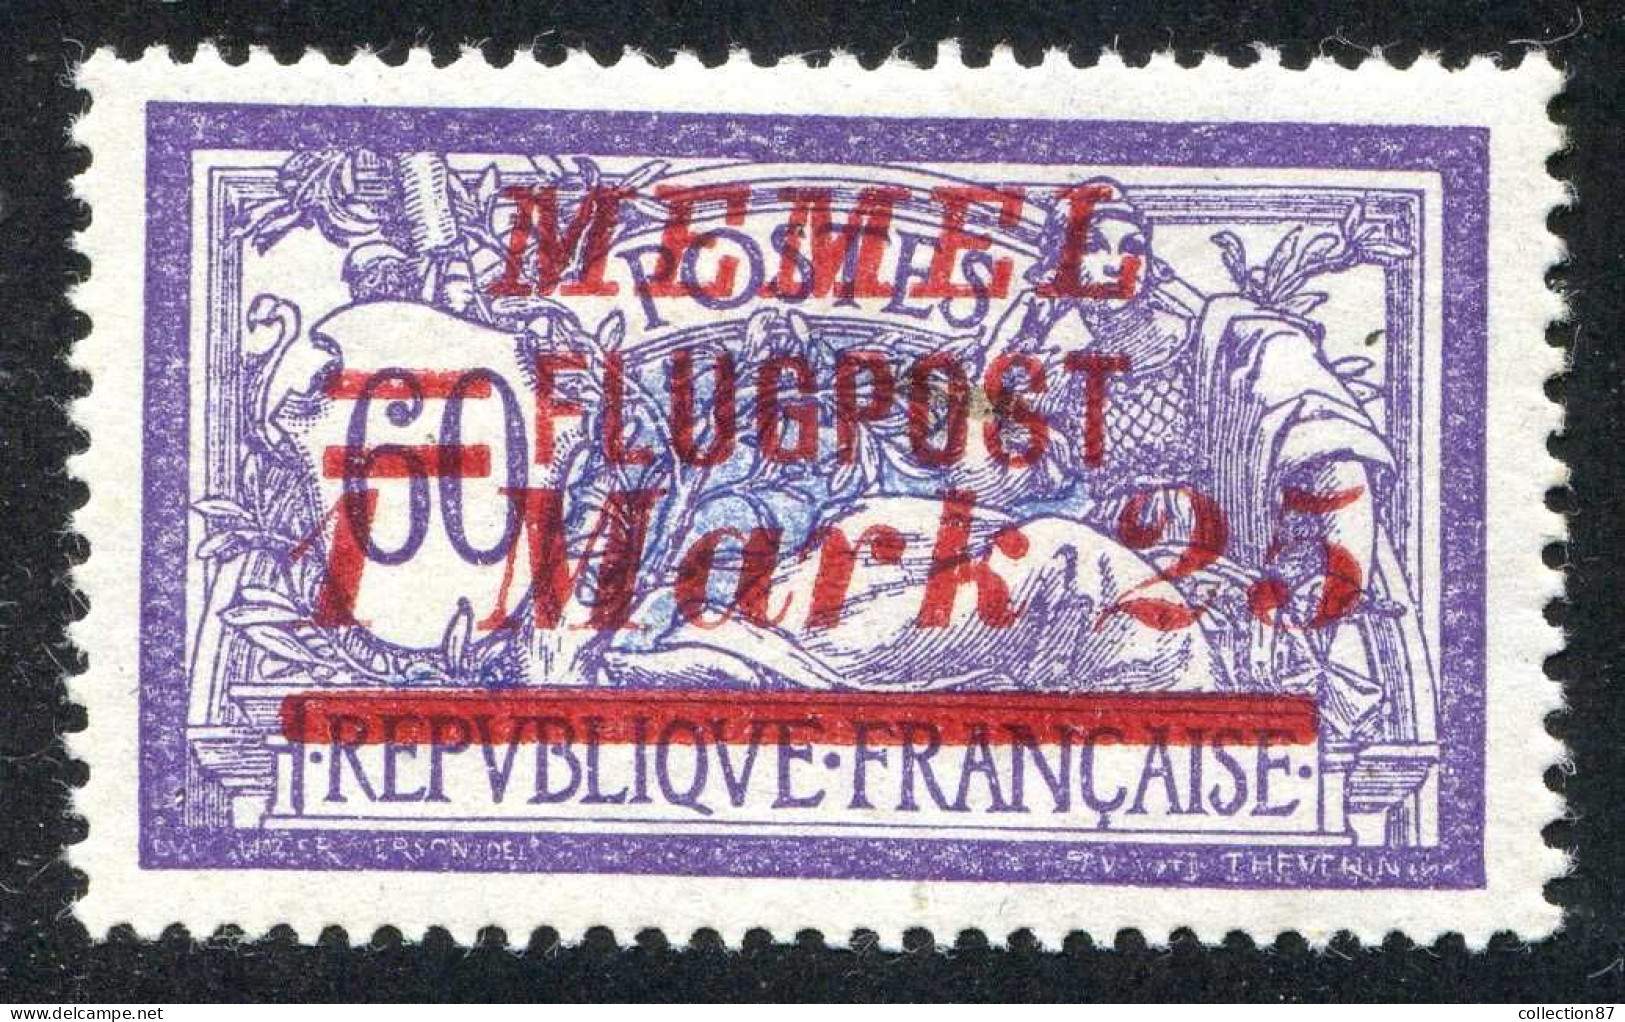 REF 088 > MEMEL FLUGPOST < PA N° 22A * Chiffre Espacé 3/4 Mn < Neuf Ch Dos Visible - MH * > Air Mail - Aéro - Unused Stamps